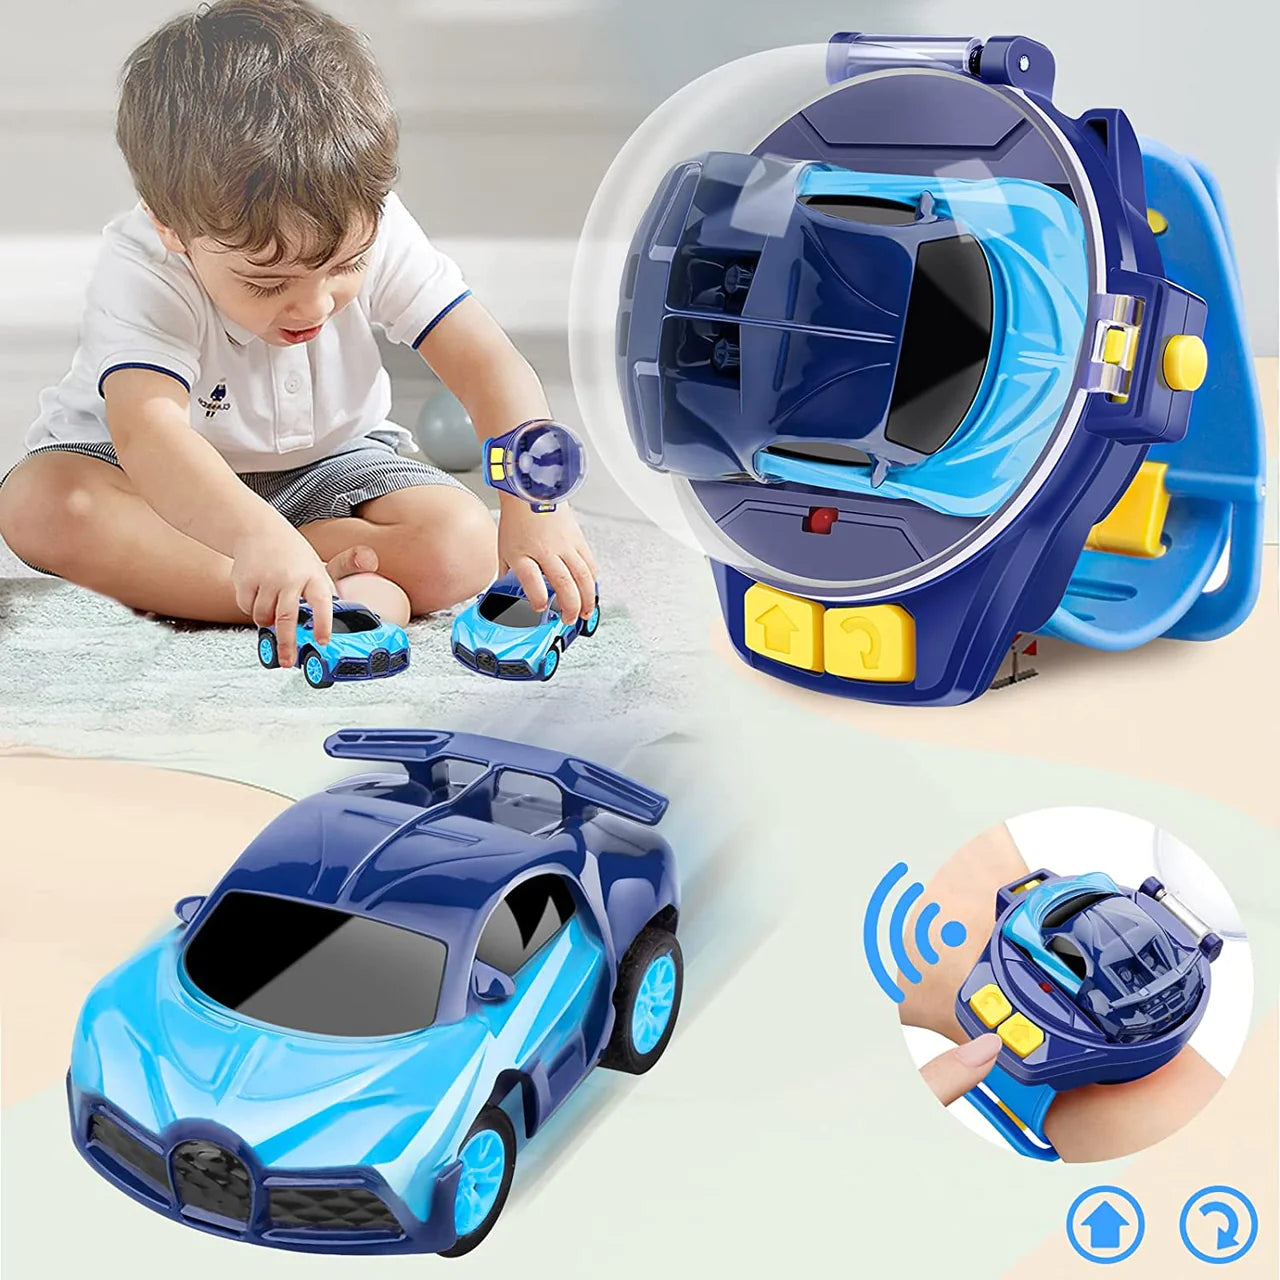 Watch Remote Control Car Toy Mini Watch Control Car Toys Cute Watch RC Car Toy With Light Attractive Gift For Boys And Girls